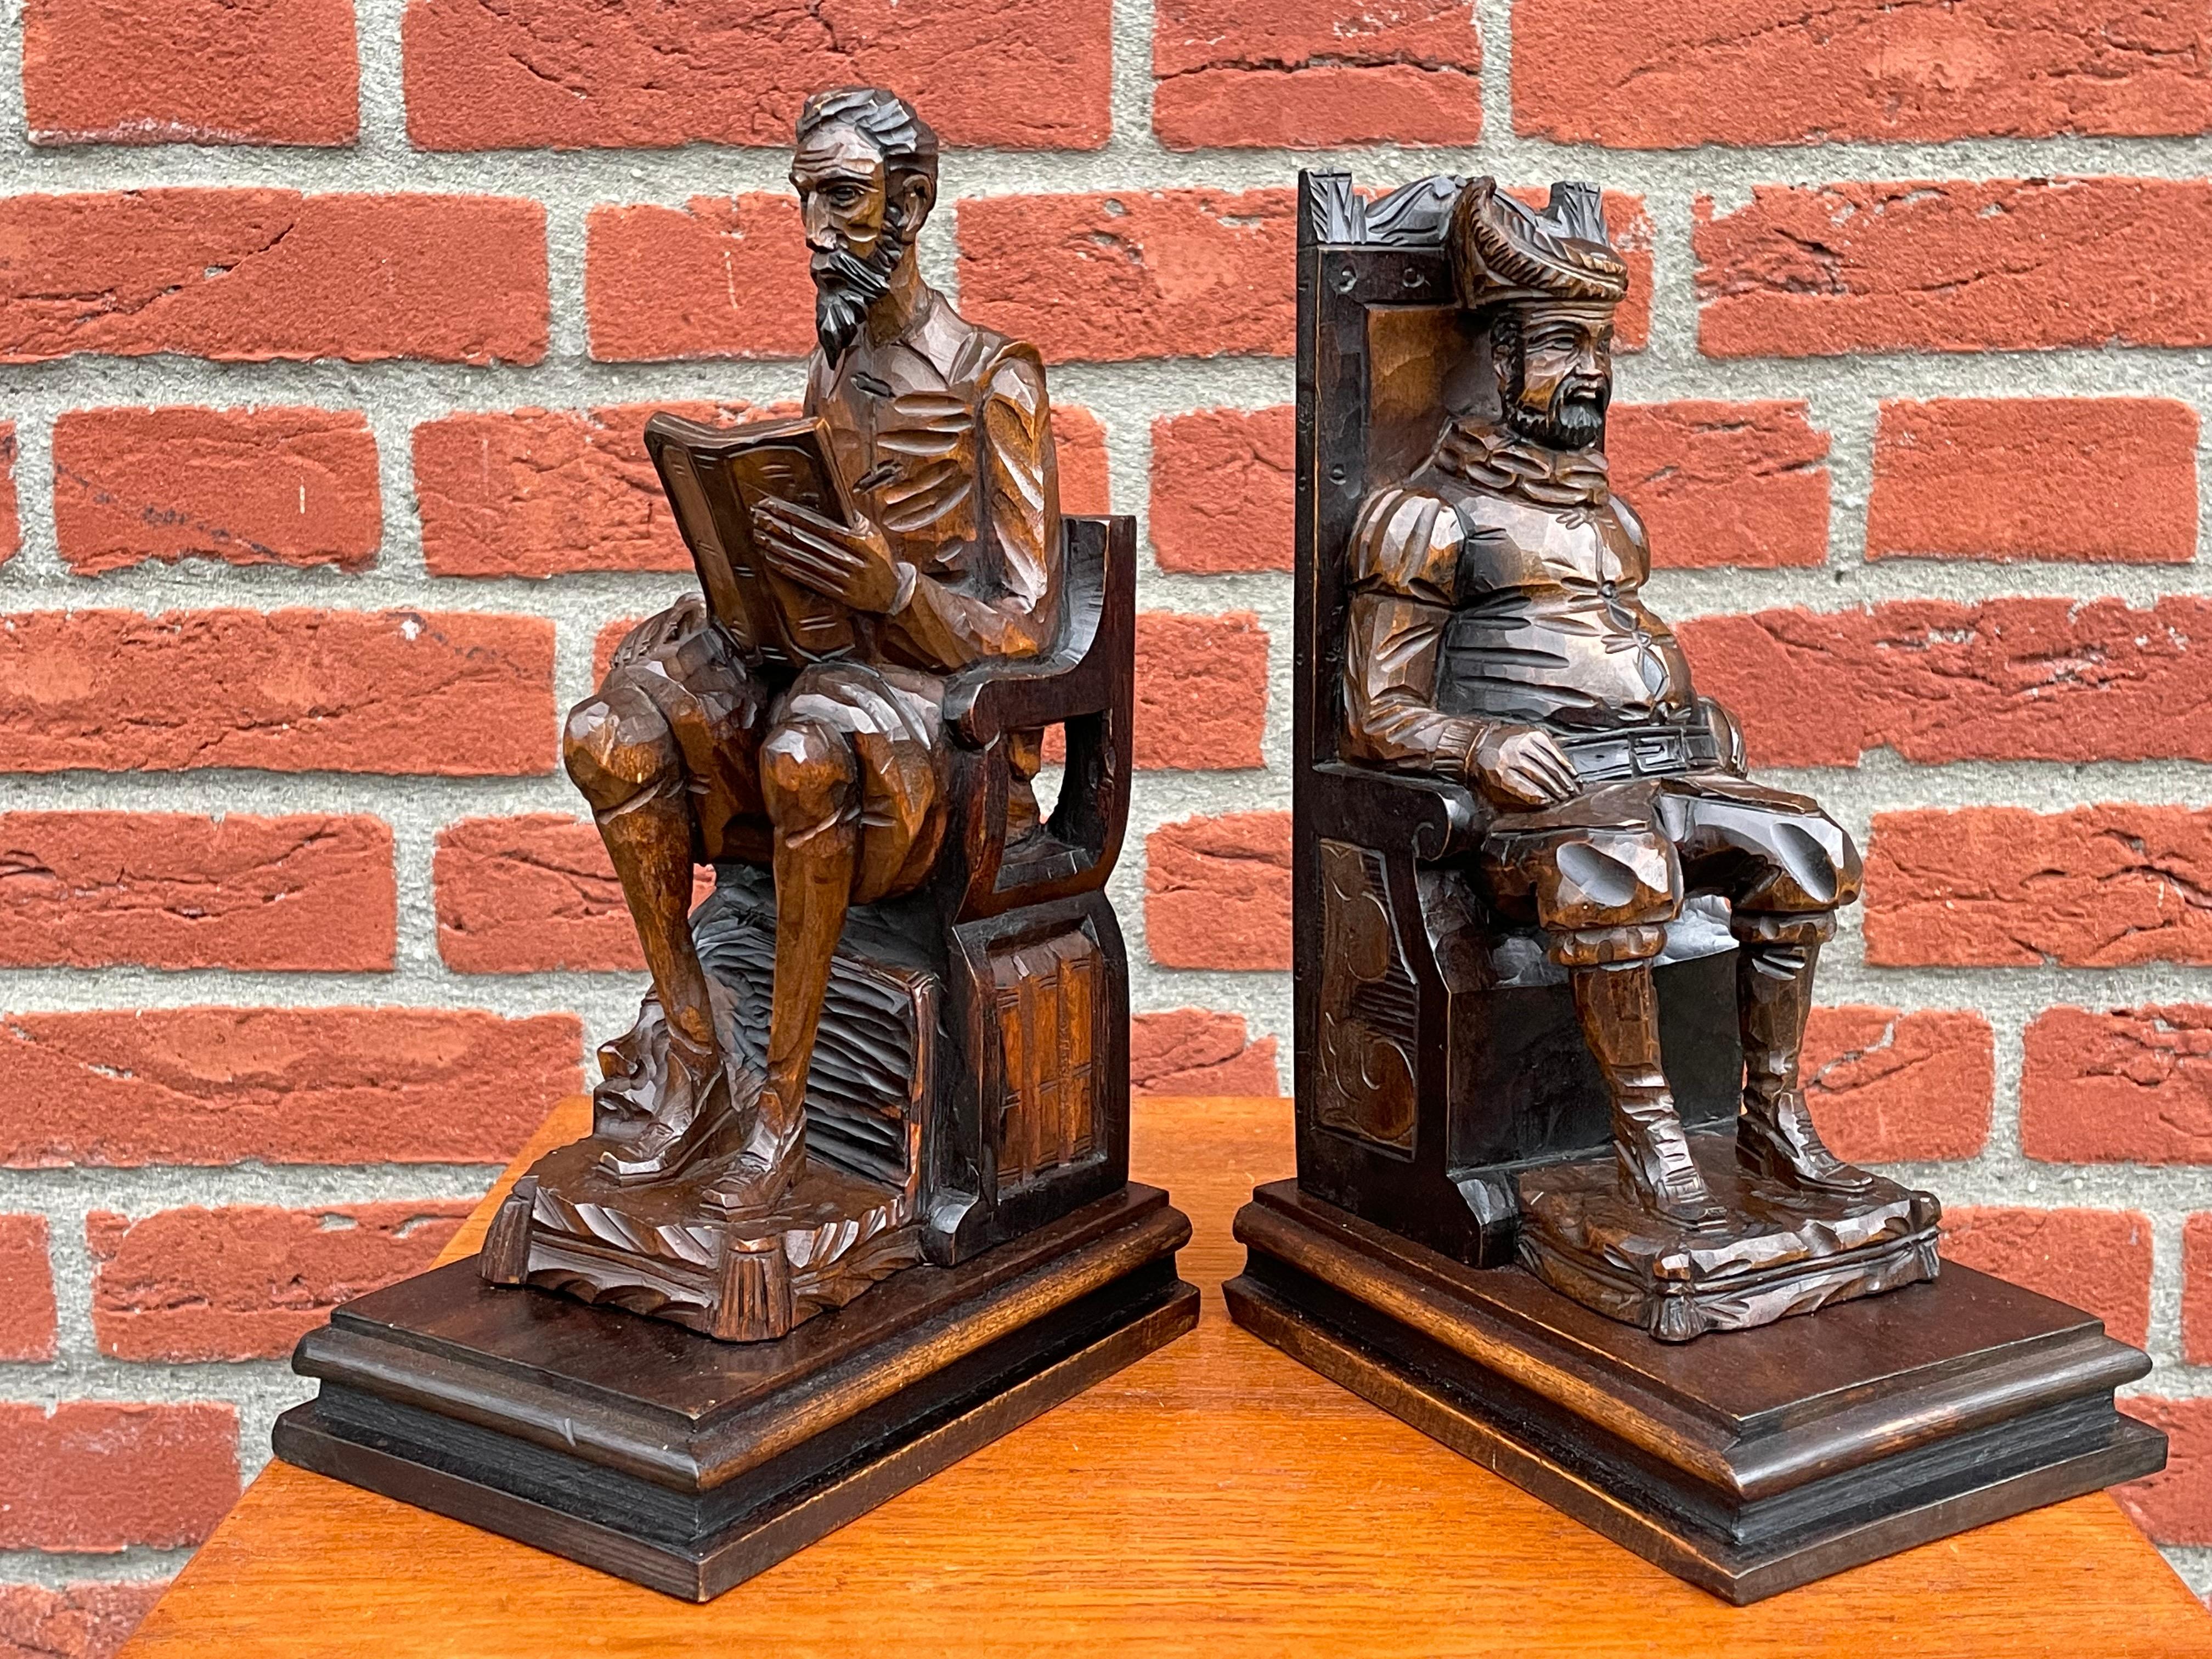 European Near Antique Hand Carved Wooden Don Quixote and Sancho Panza Sculpture Bookends